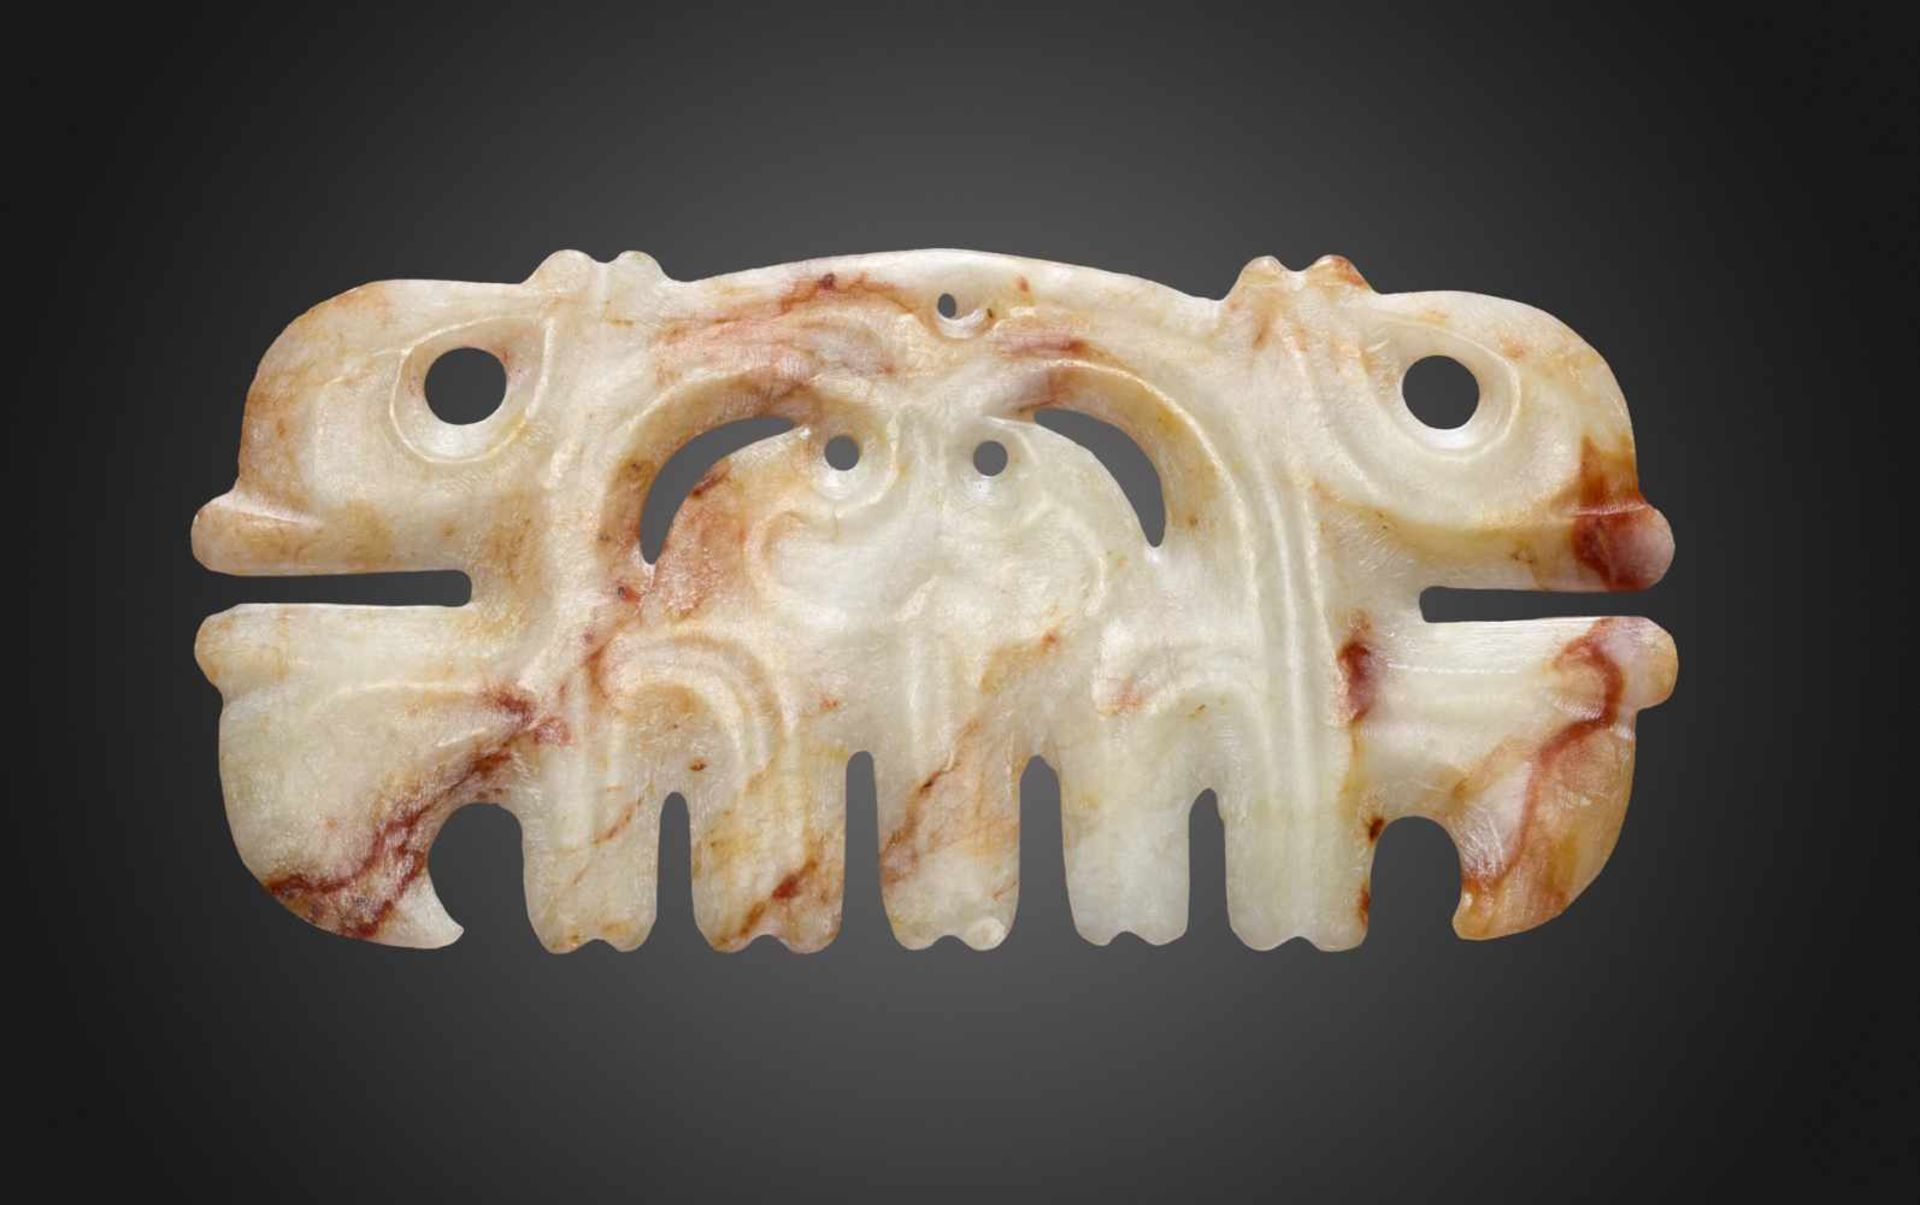 AN IMPOSING HONGSHAN “TOOTHED” ORNAMENT WITH MASK MOTIF Jade. China, Late Neolithic period, Hongshan - Image 2 of 6